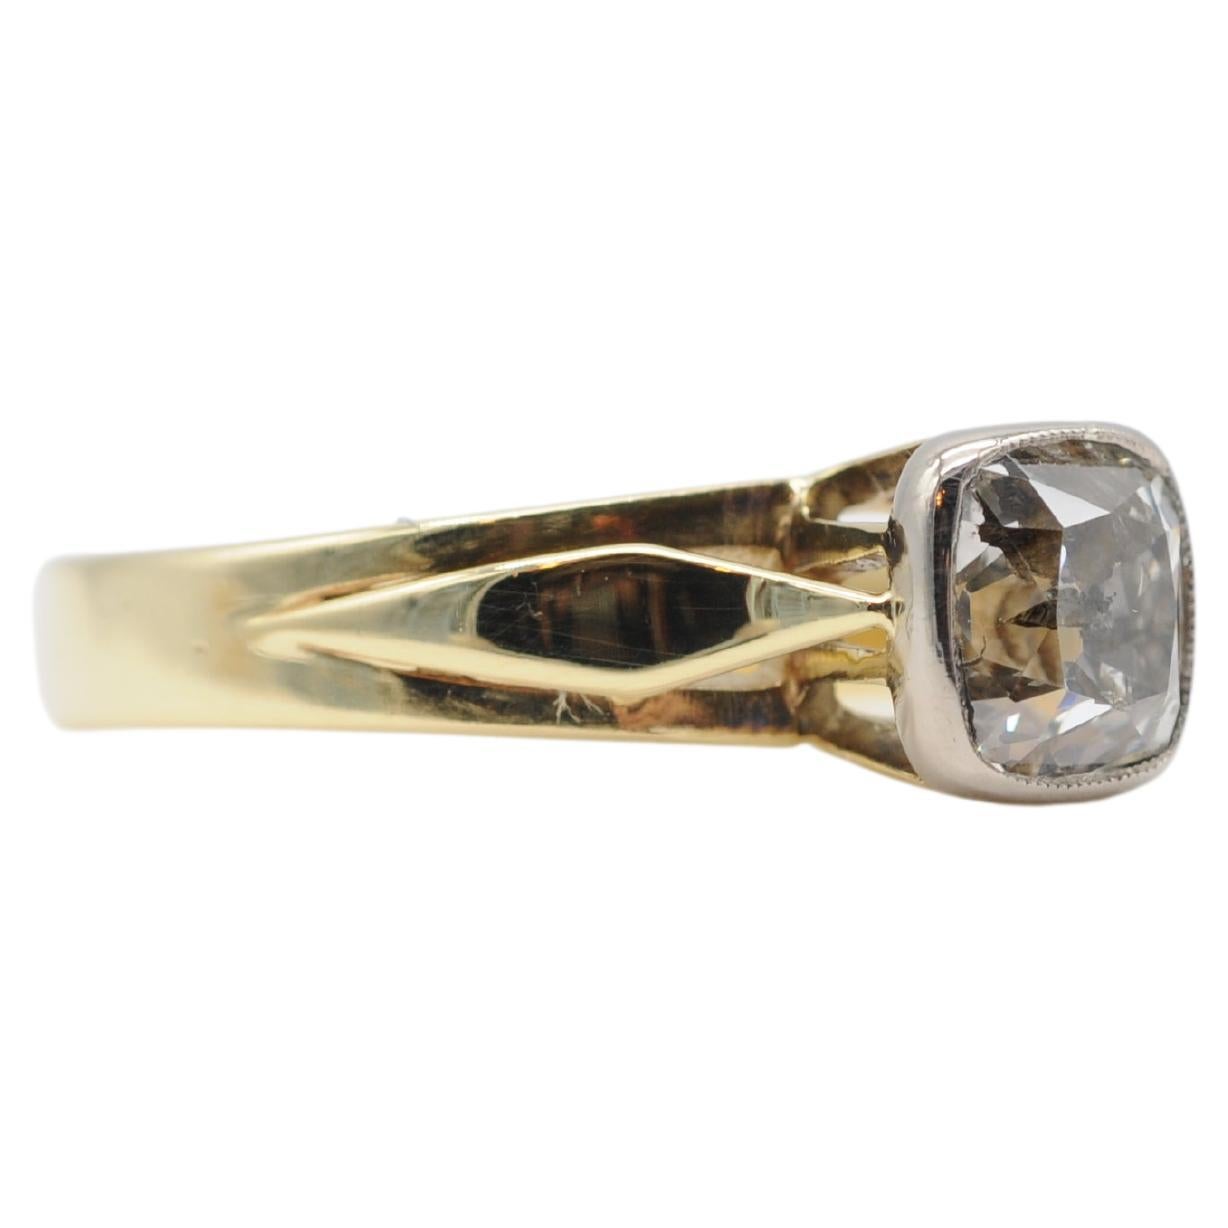 Enter the world of majesty with this antique German 14k yellow gold ring featuring a beautiful old-fashioned design. This ring is over a hundred years old, a testament to the craftsmanship of the past. Crafted by an old German goldsmith, this 14k